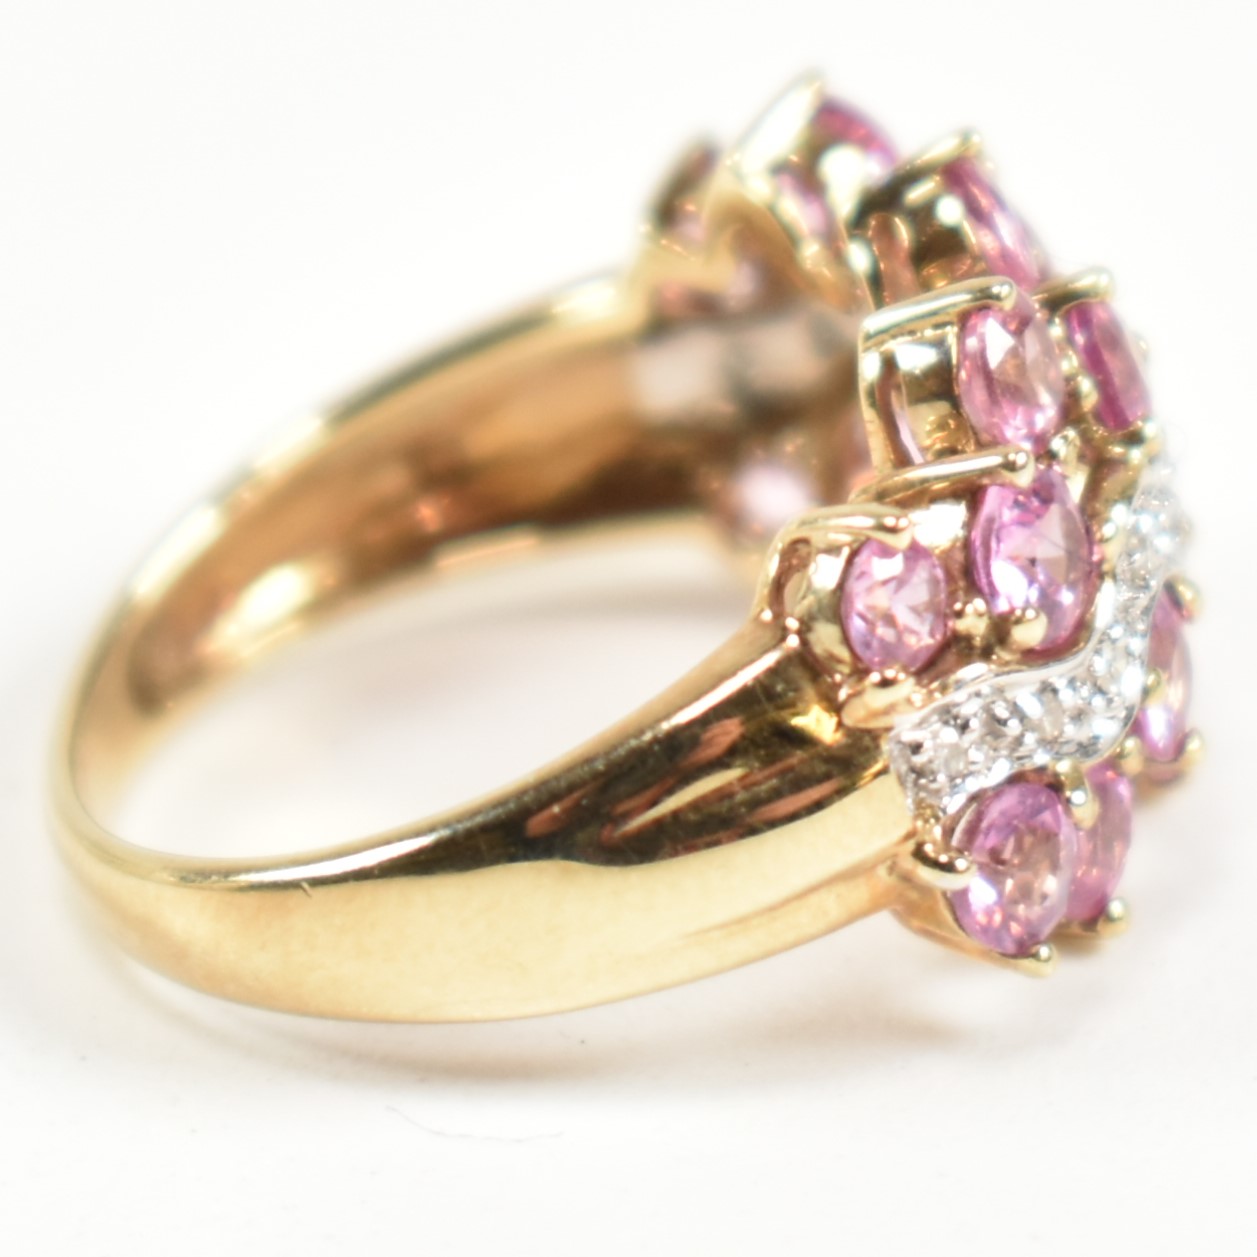 HALLMARKED 9CT GOLD PINK SAPPHIRE & DIAMOND CLUSTER RING - Image 4 of 9